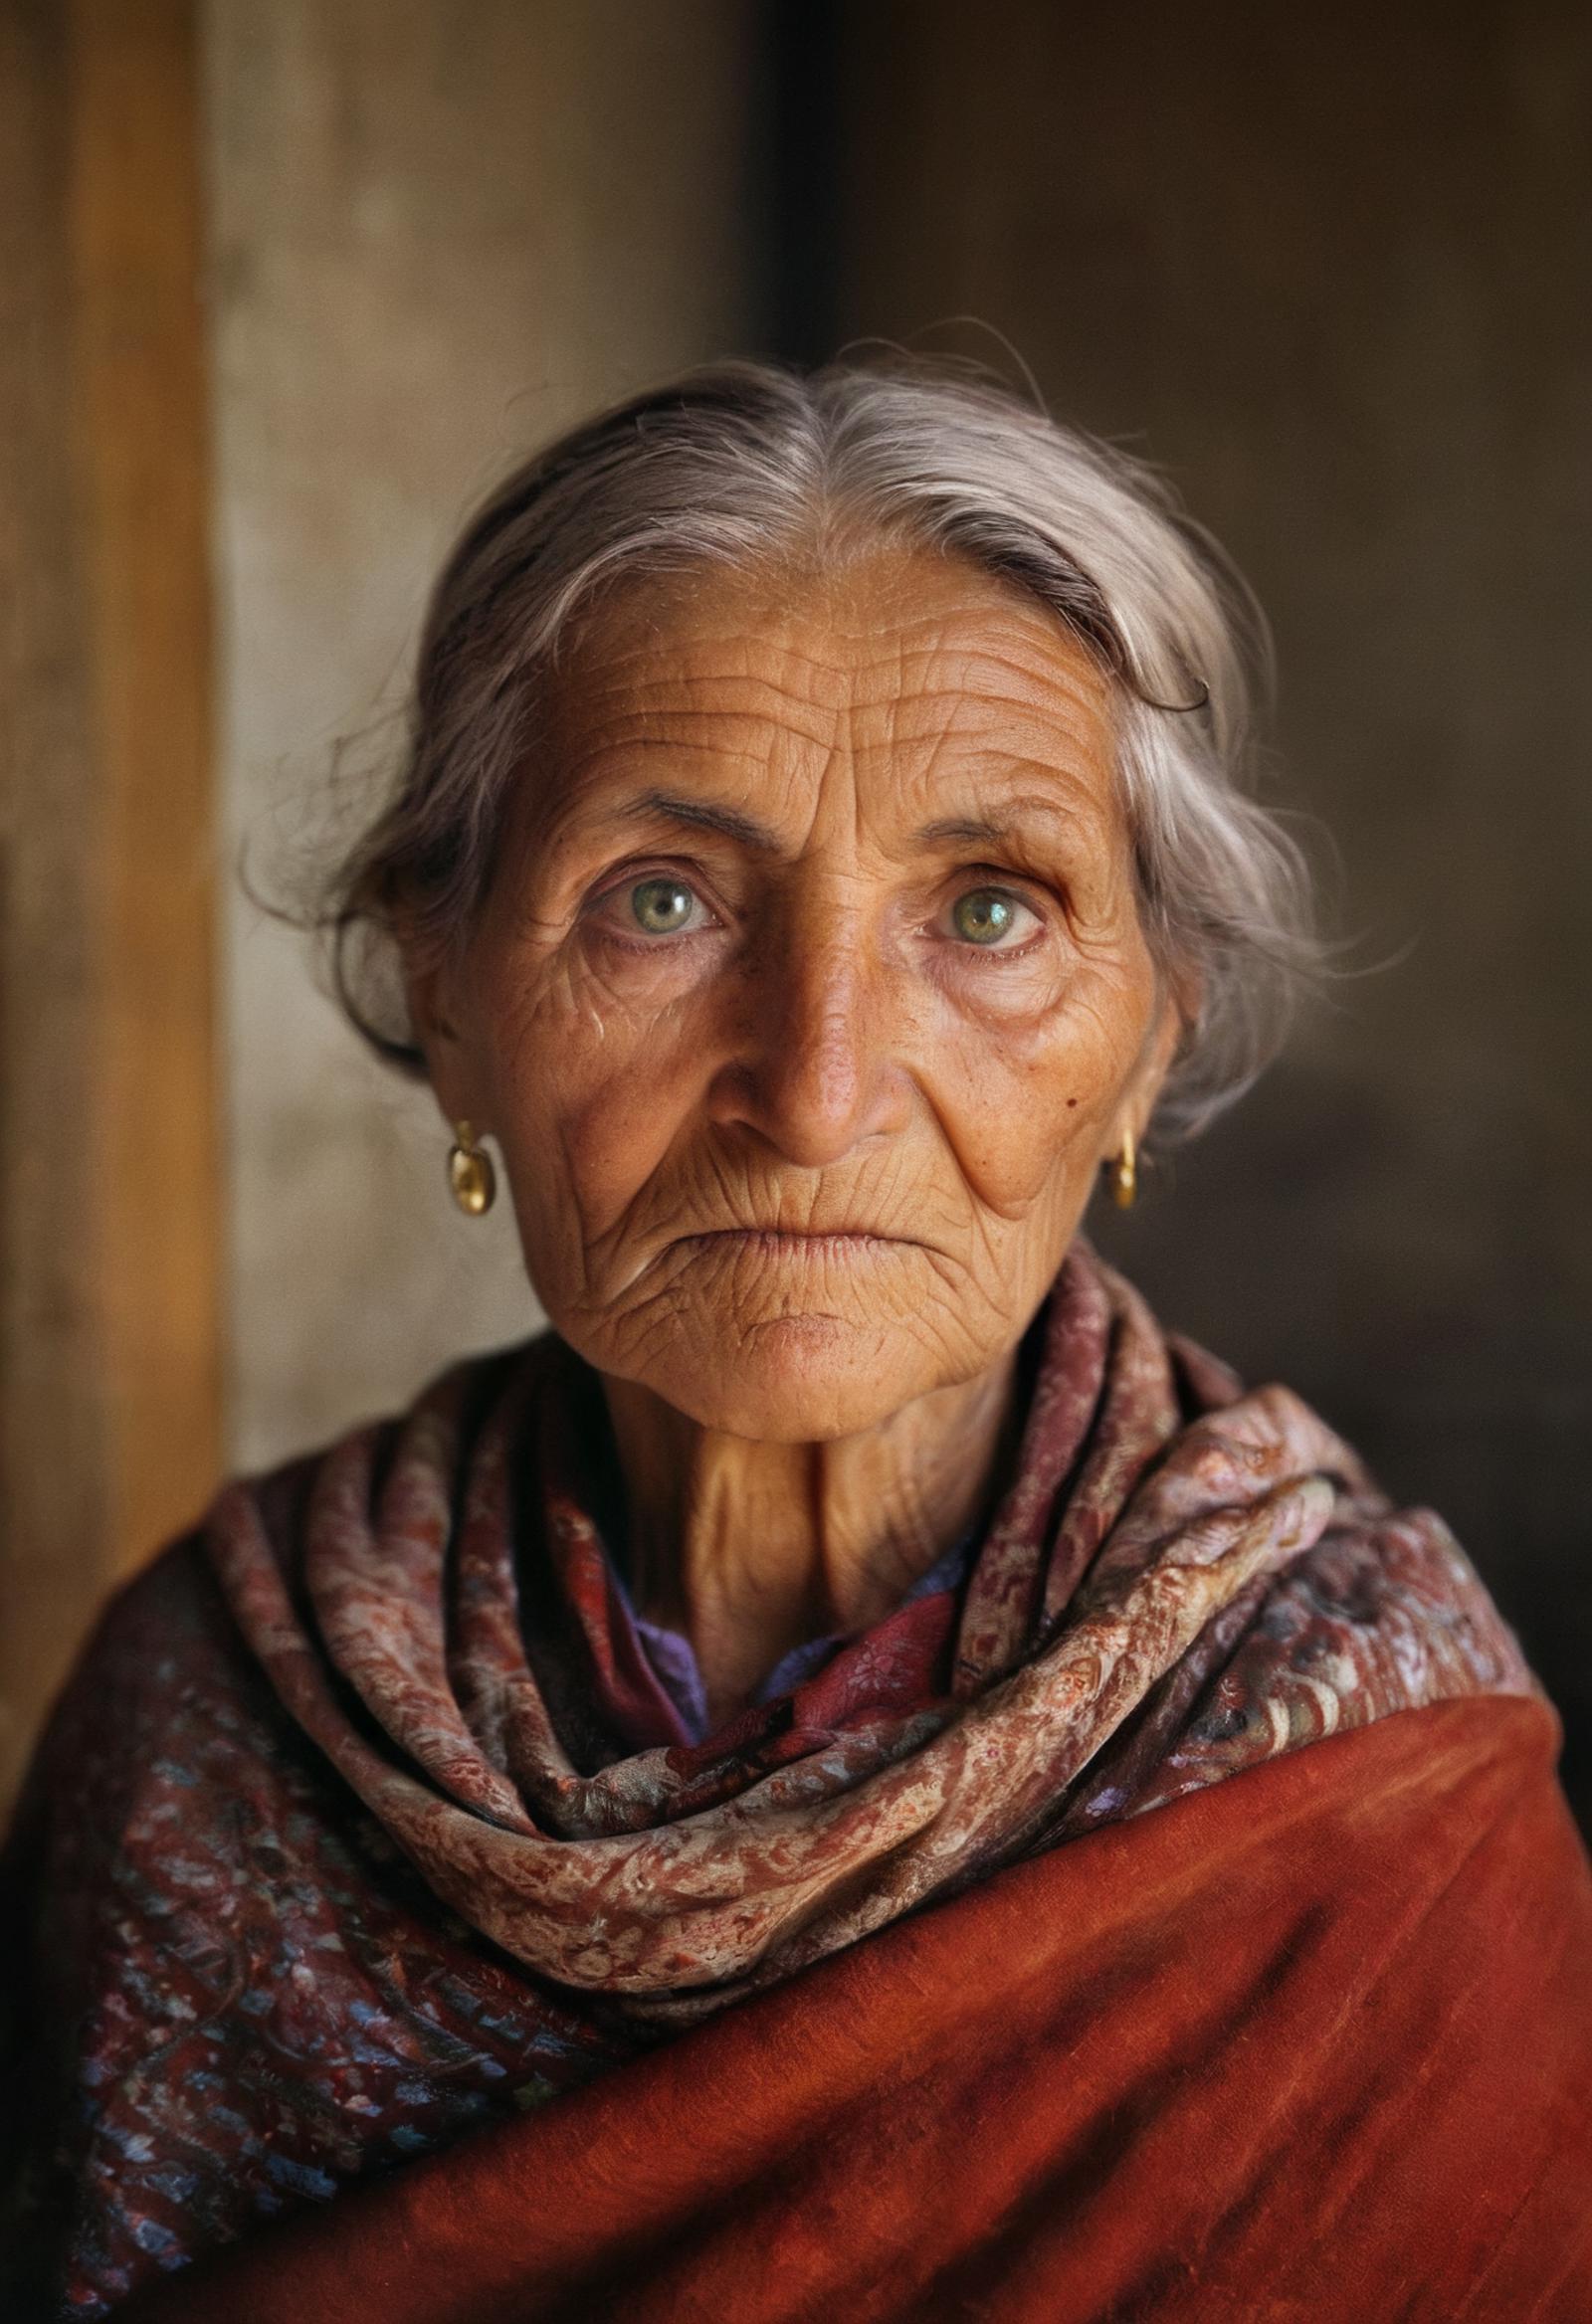 Steve McCurry - Photography SDXL LoRa image by FrenzyX